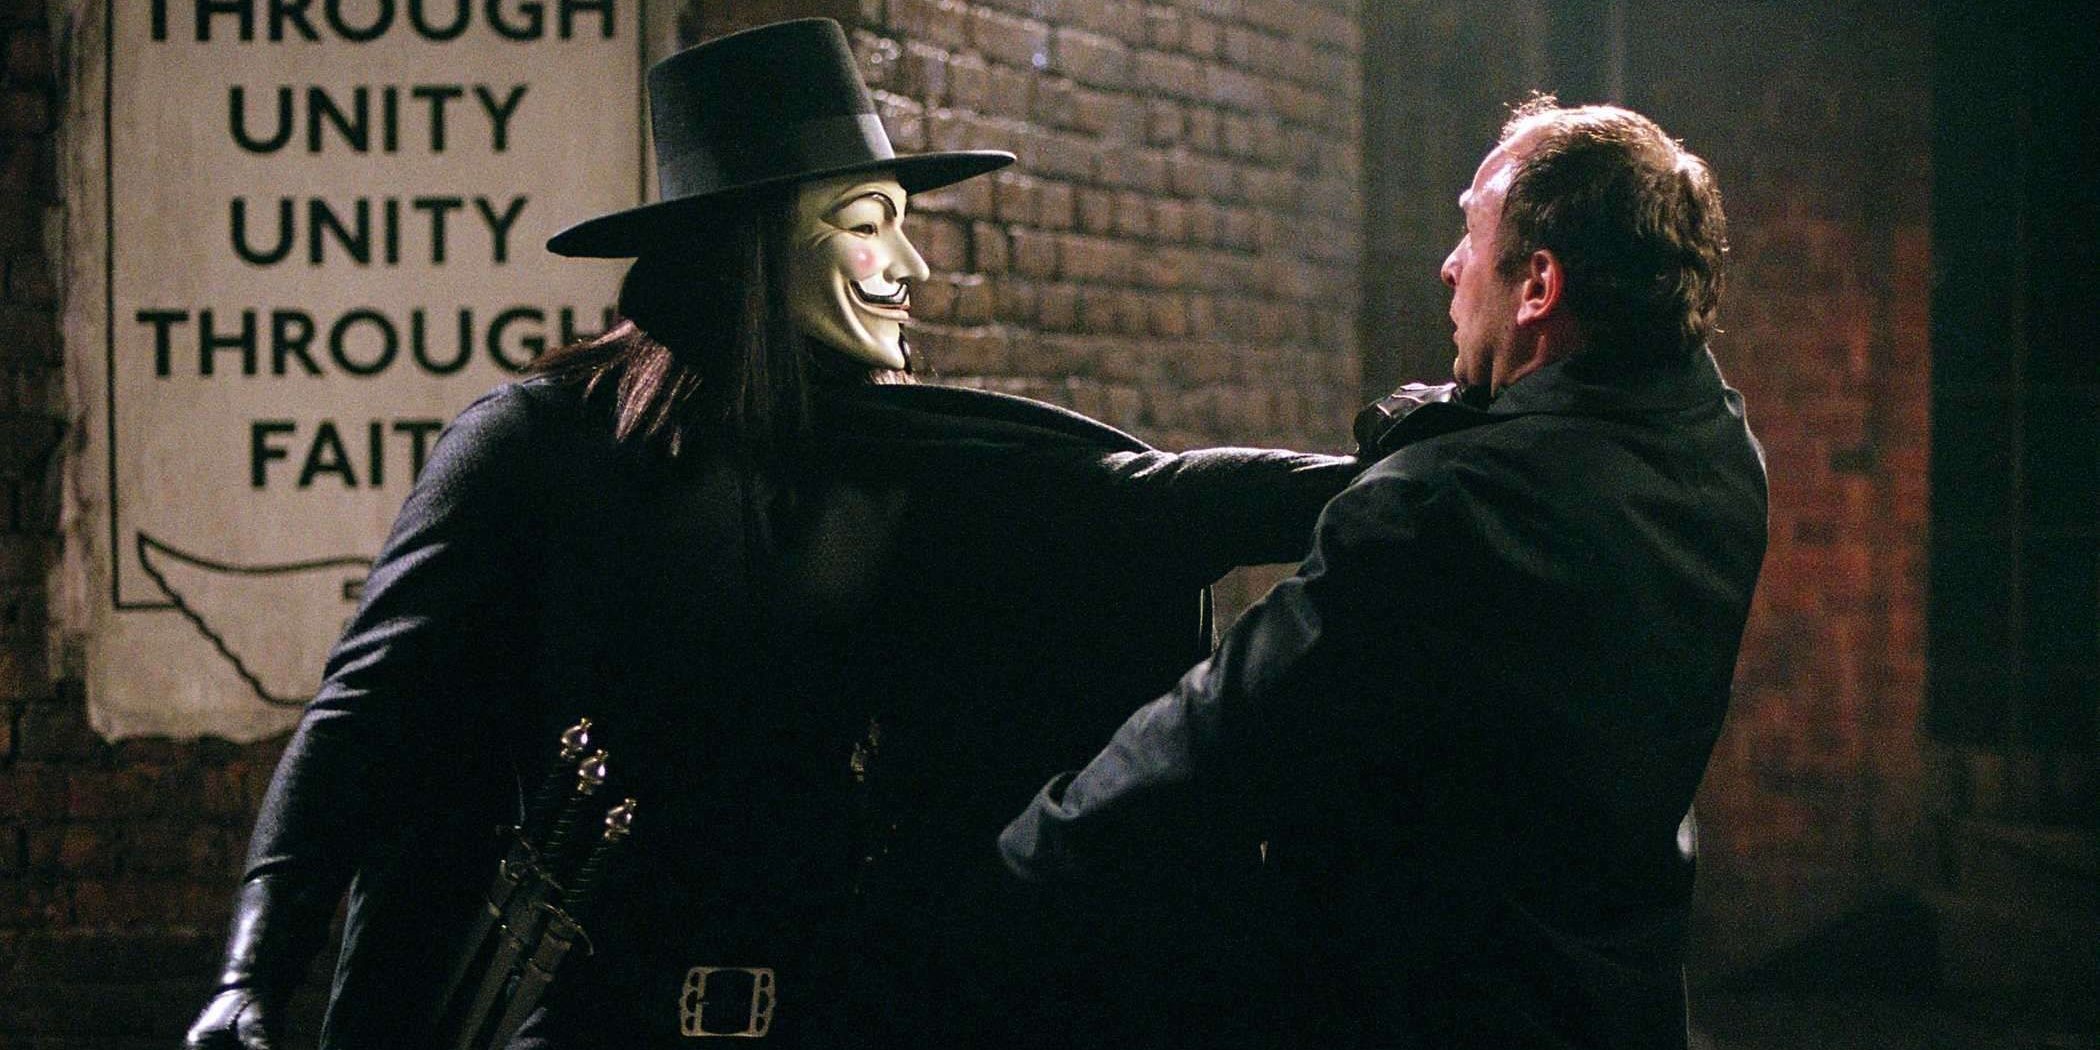 V attacks a man in an alley at night in the film V for Vendetta.